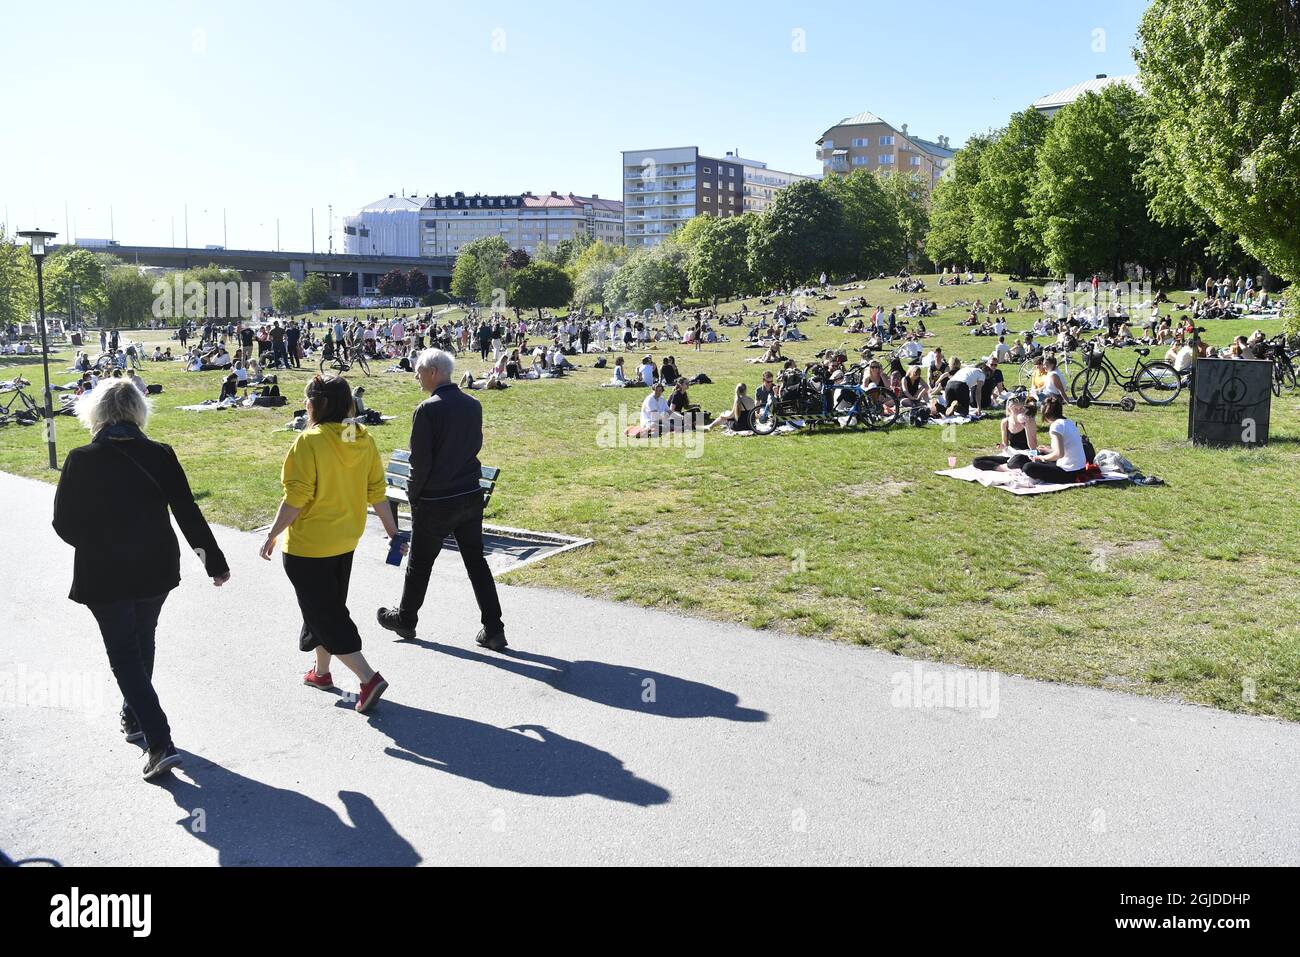 STOCKHOLM 20200530 A lot of people in Tantolunden park on Saturday May 30, 2020 during the corona pandemic. Social distancing or not. Photo: Henrik Montgomery / TT / kod 10060 *SWEDEN OUT*  Stock Photo